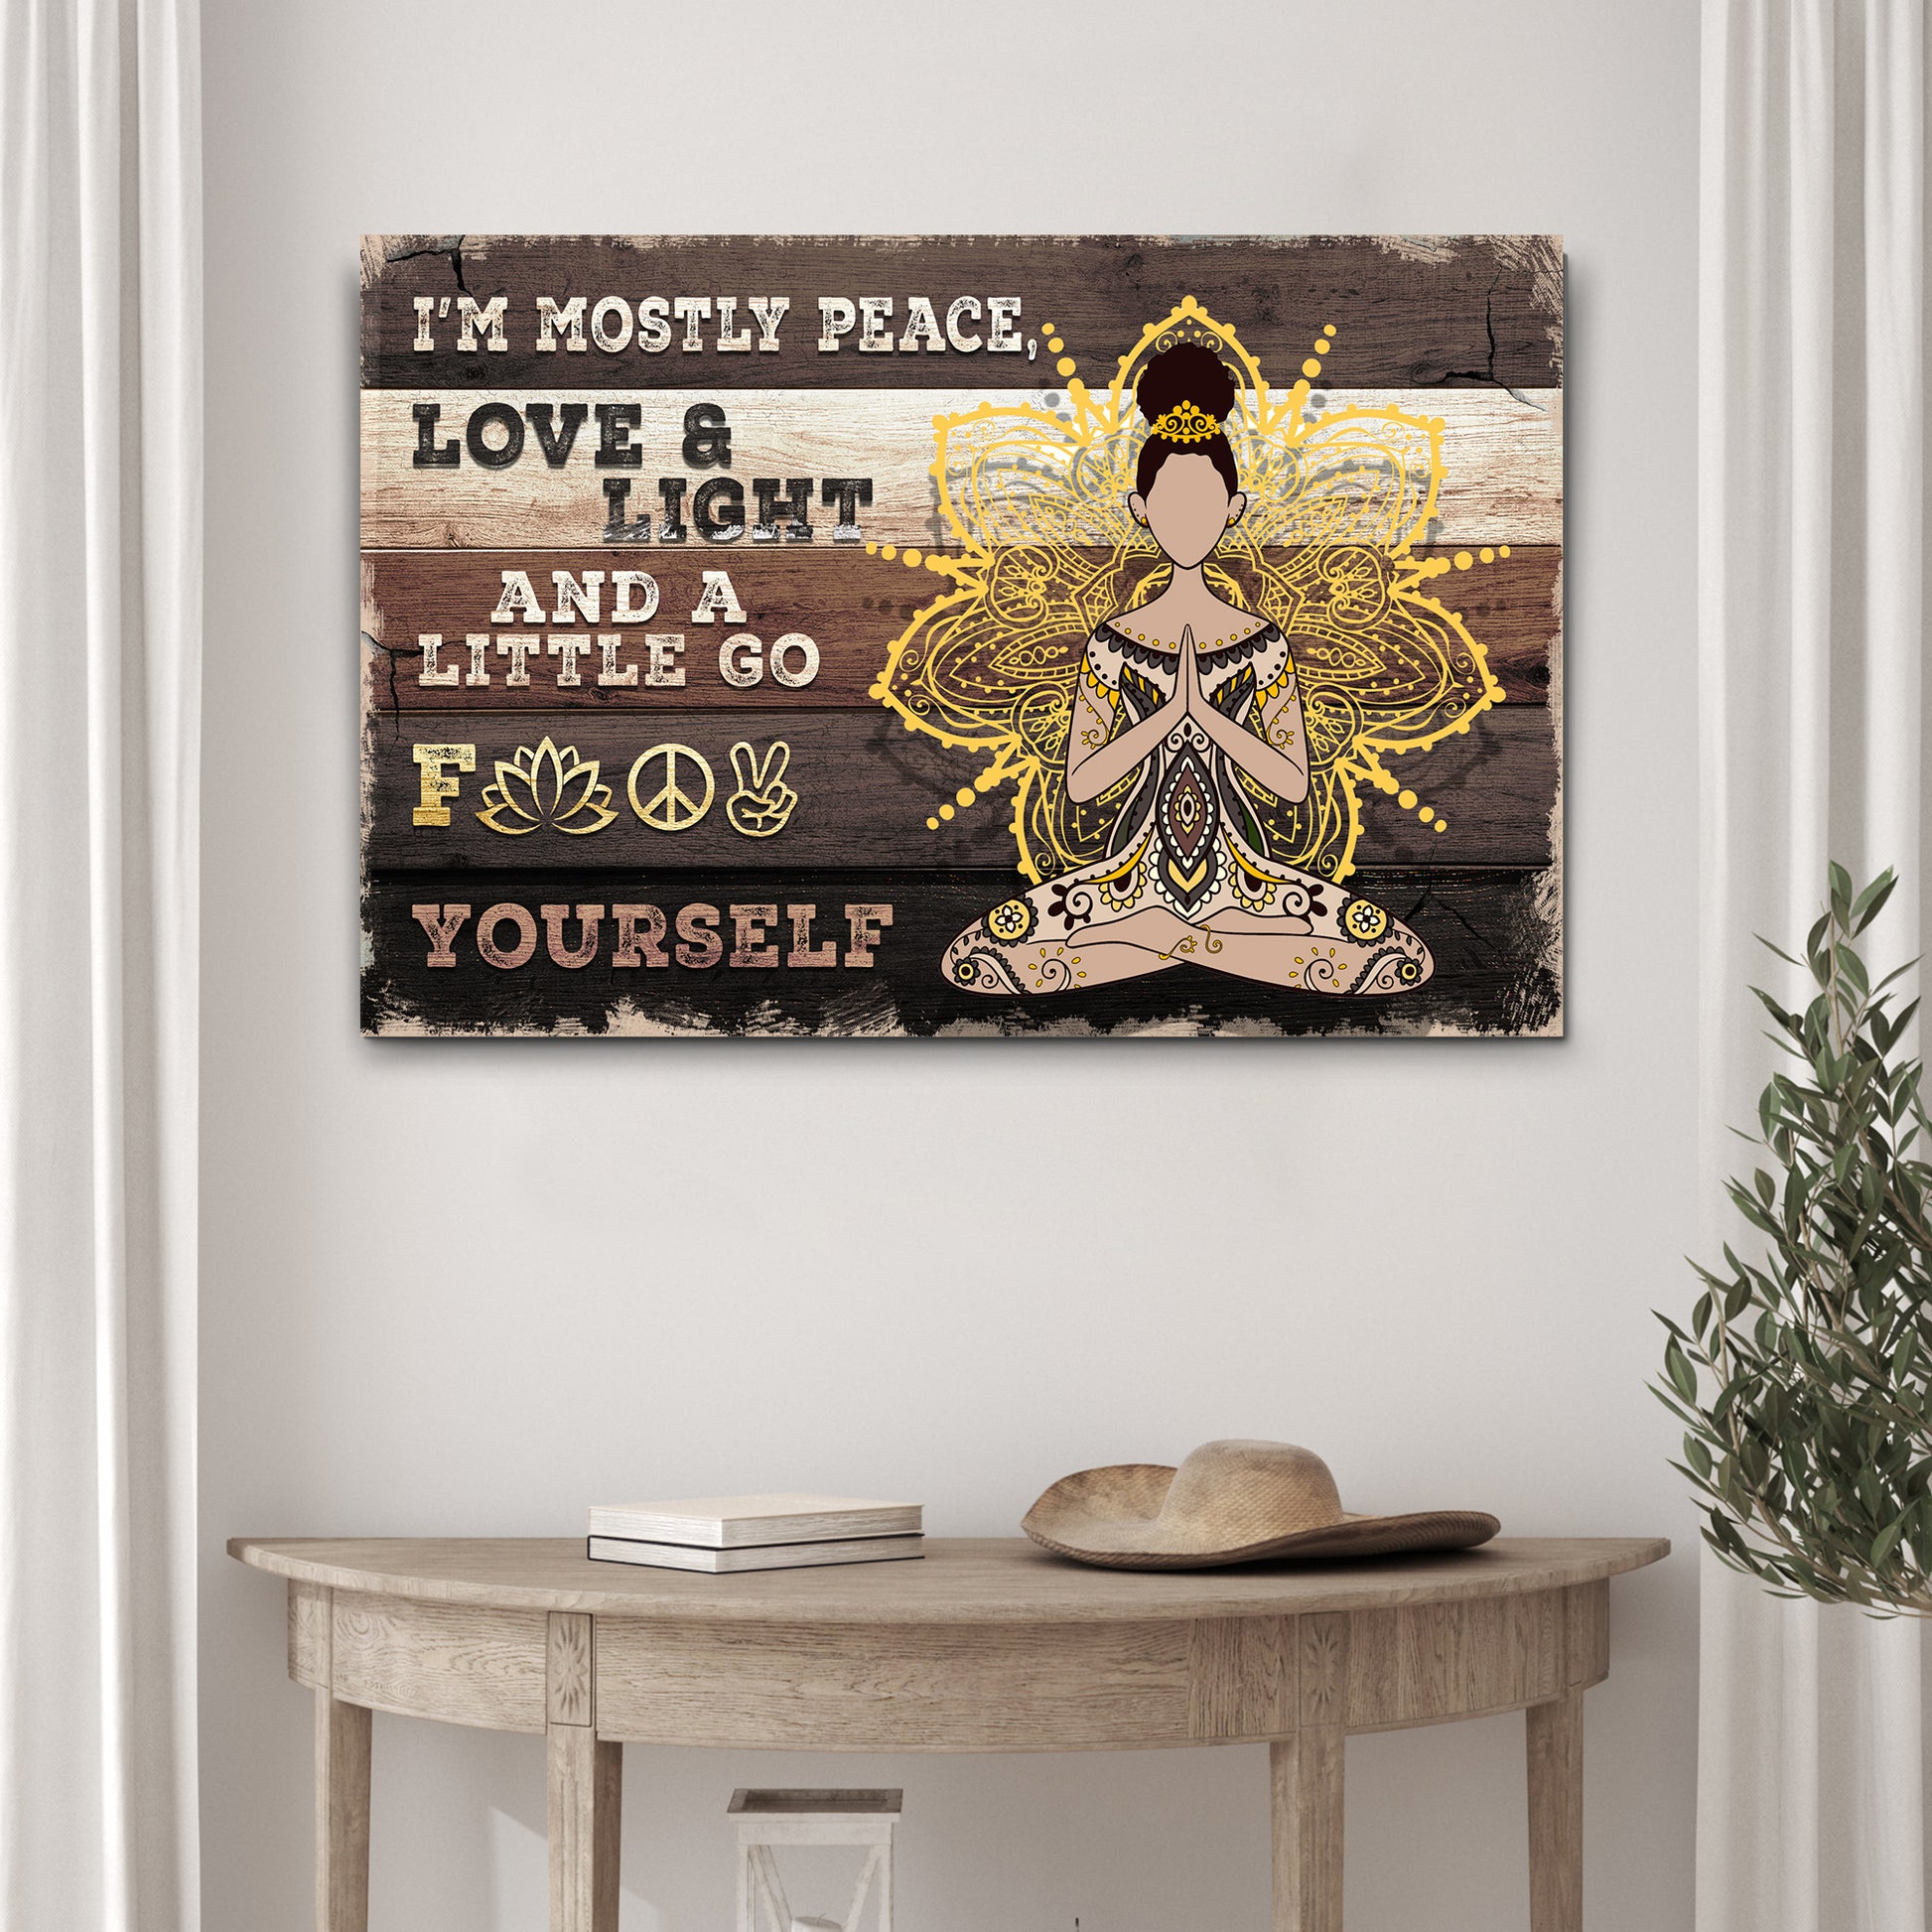 I'm Mostly Peace, Love And Light Sign II - Image by Tailored Canvases